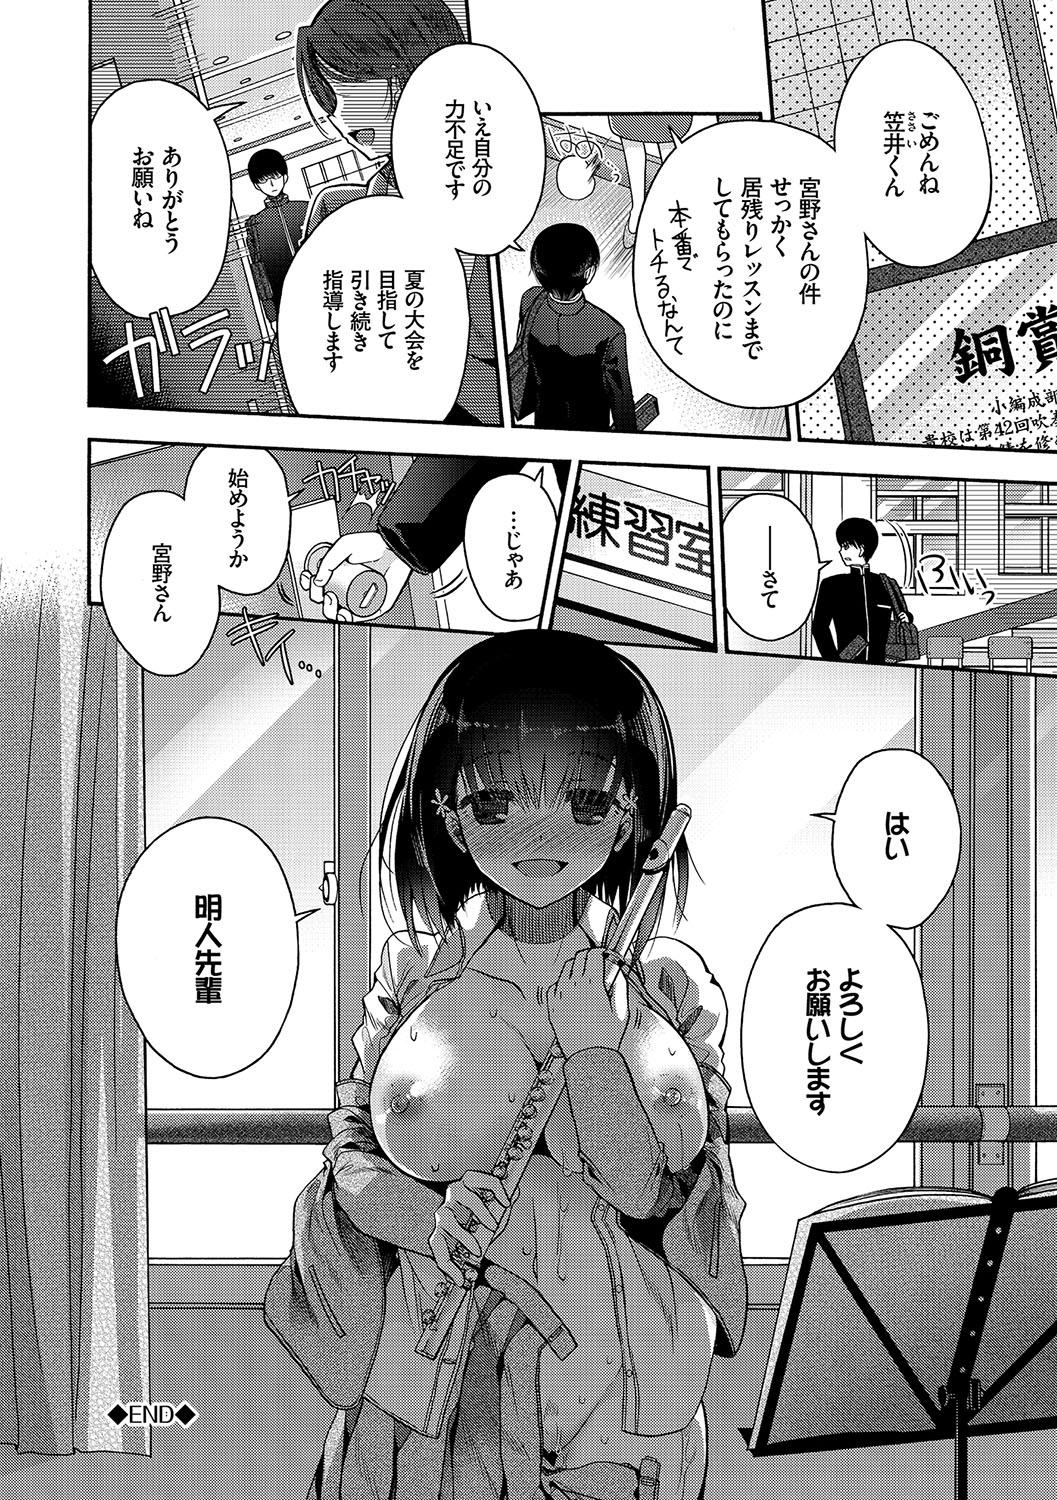 Hatsukoi Melty - Melty First Love 24